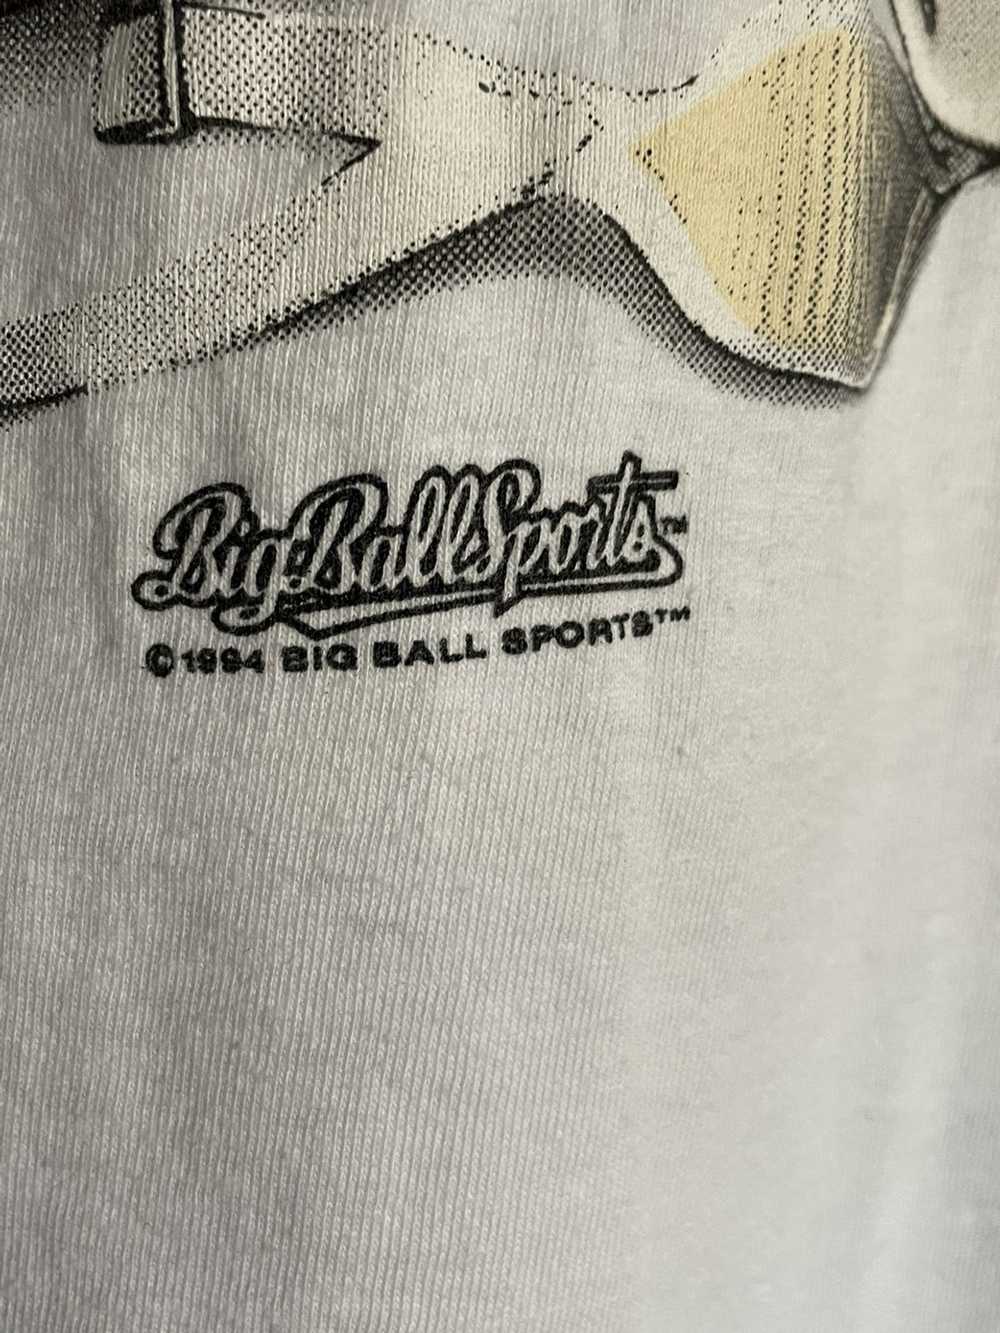 Made In Usa × Vintage 1994 VTG Big Ball Sports T-… - image 7